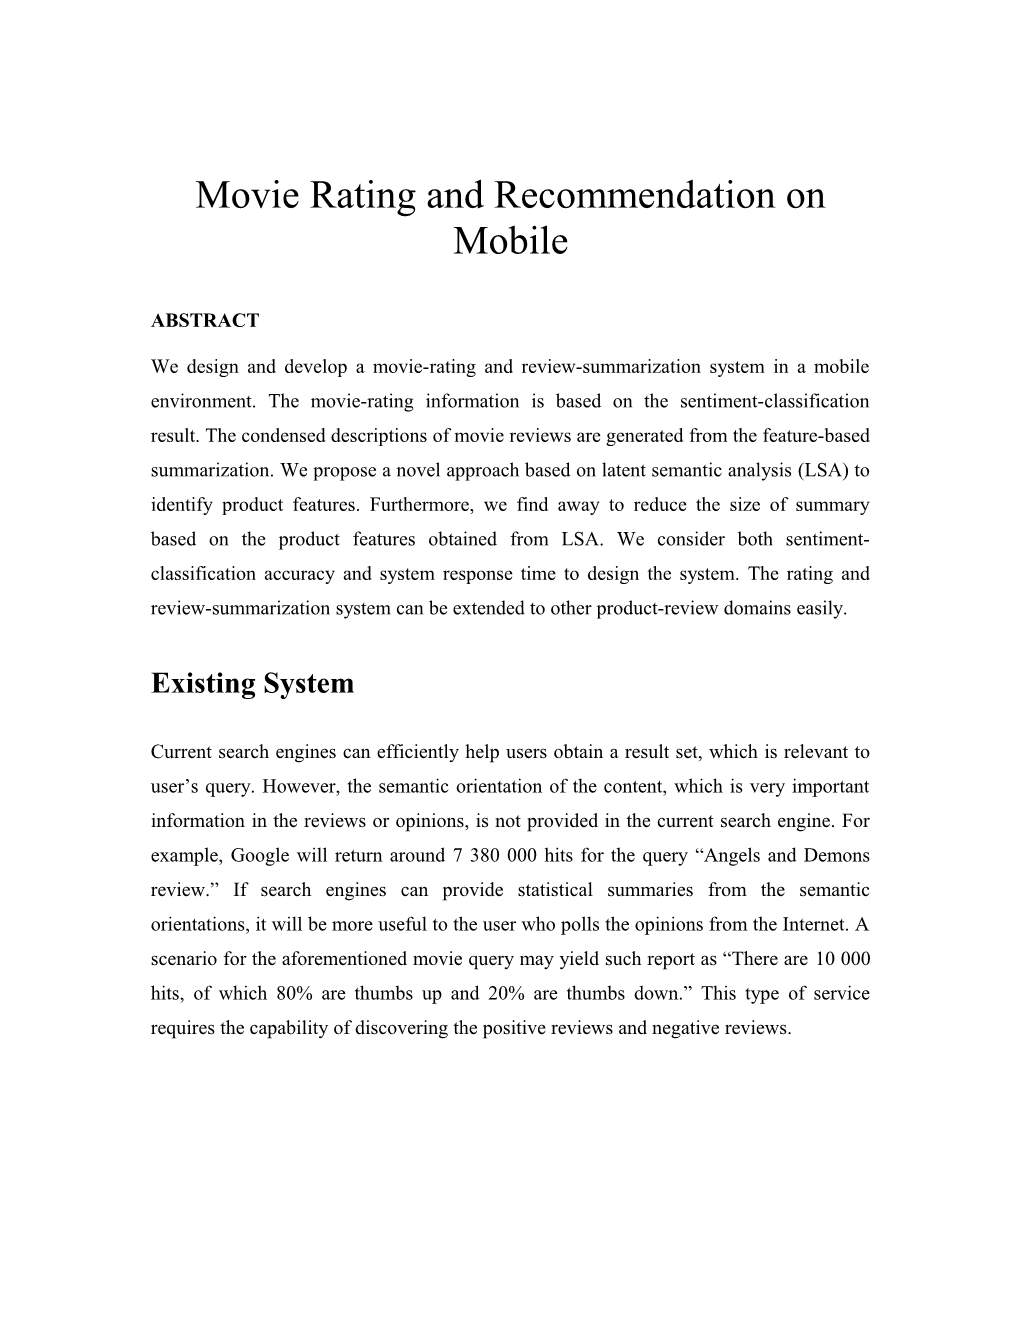 Movie Rating and Recommendation on Mobile